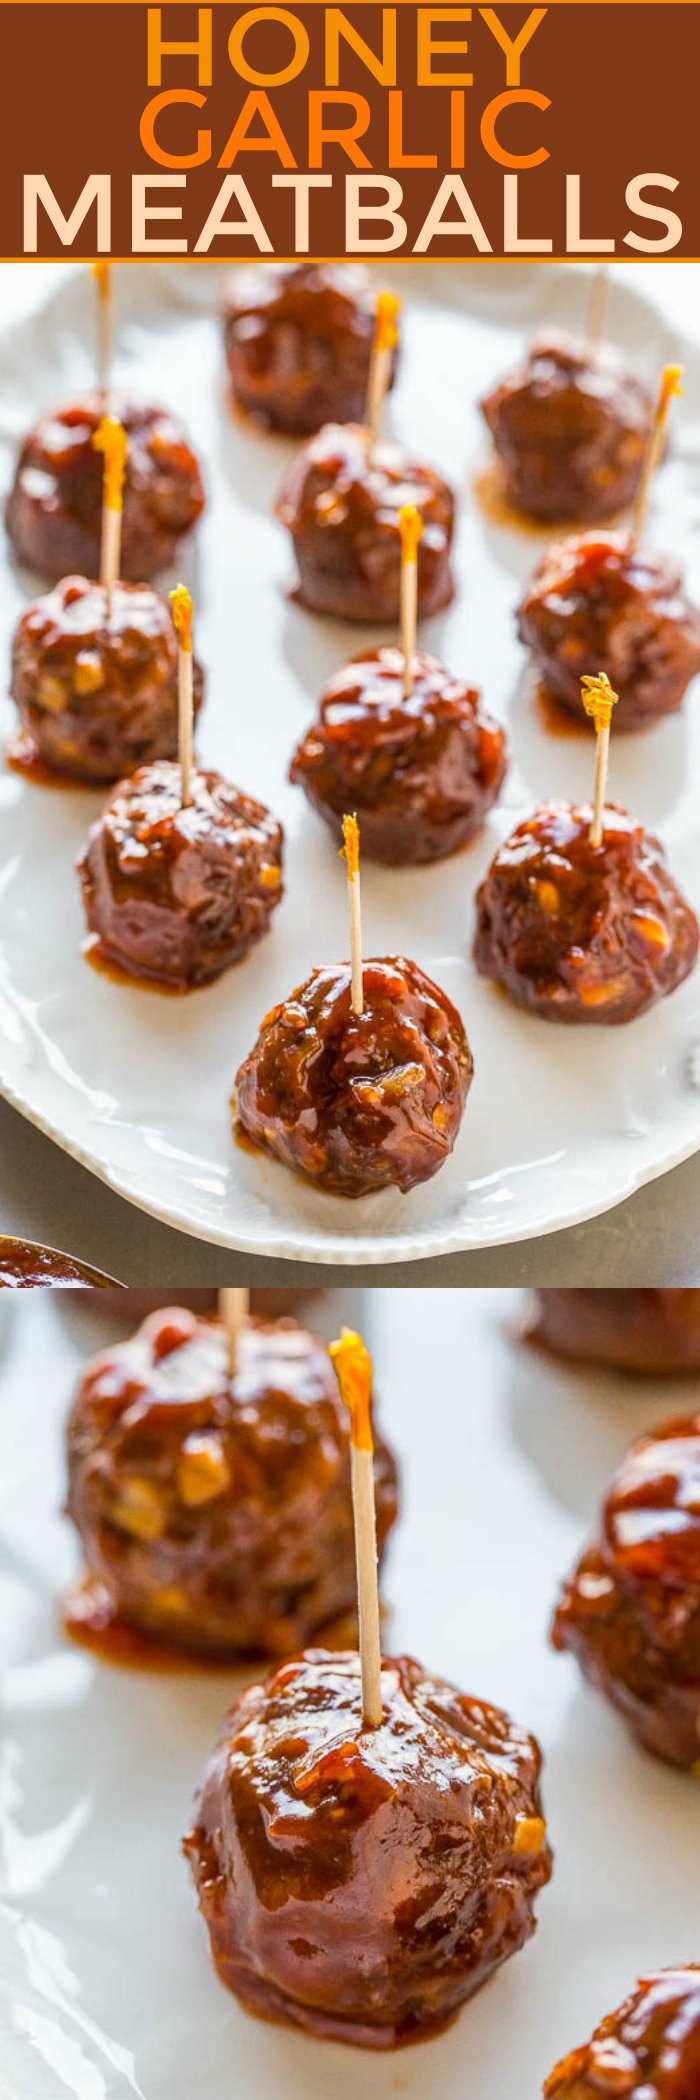 Honey Garlic Meatballs - Juicy, tender, and the honey garlic sauce adds so much FLAVOR!! Perfect for parties, holidays, game days, and more! Everyone LOVES these EASY meatballs!!